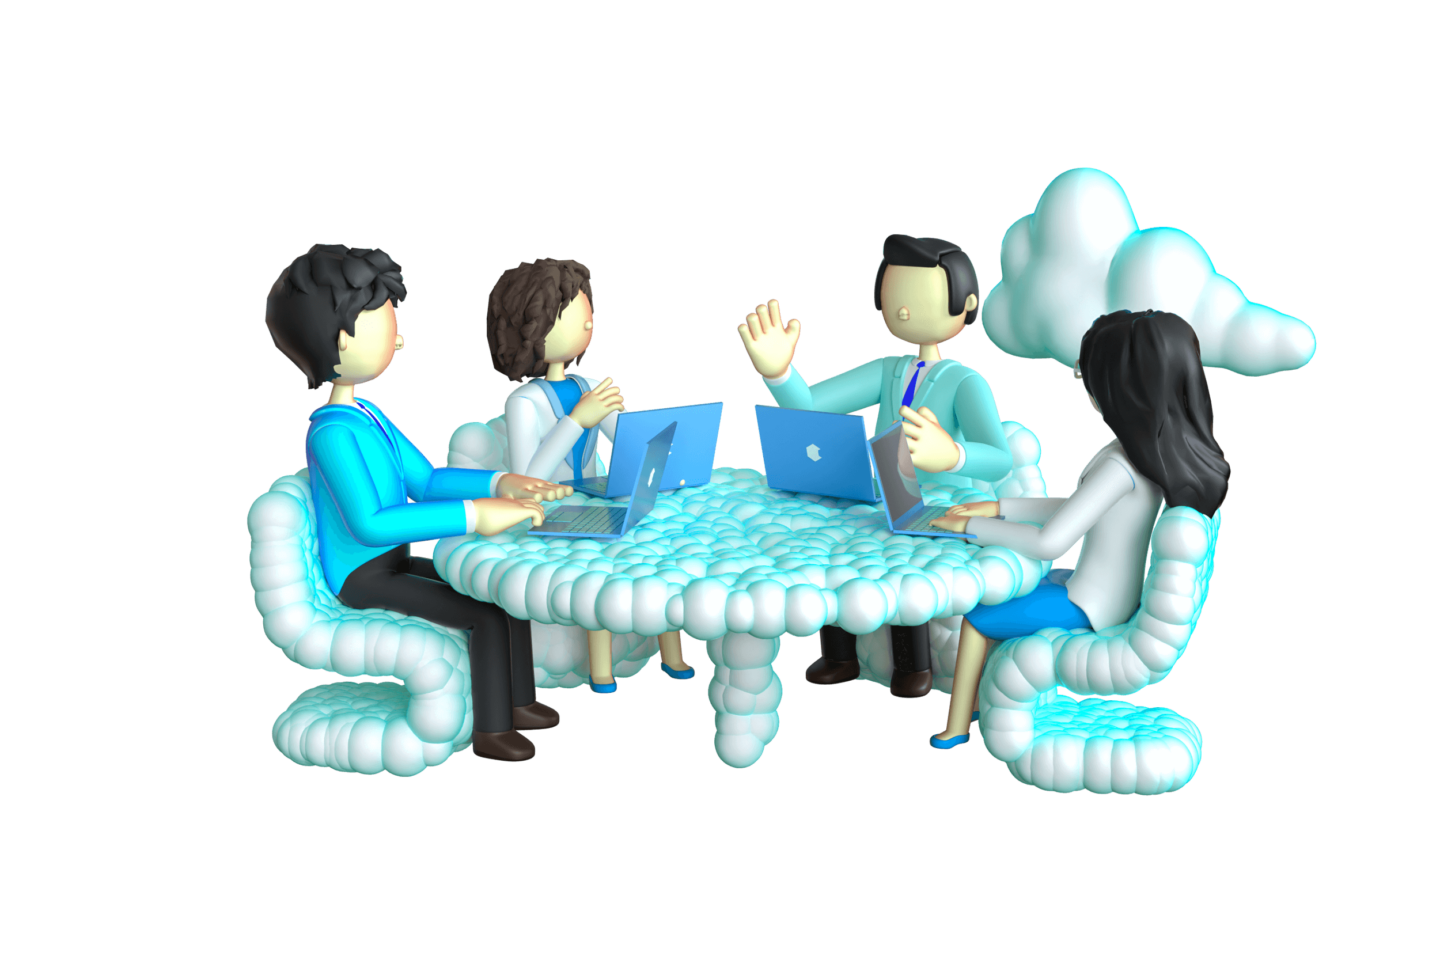 3d image of people sitting at a table with laptops